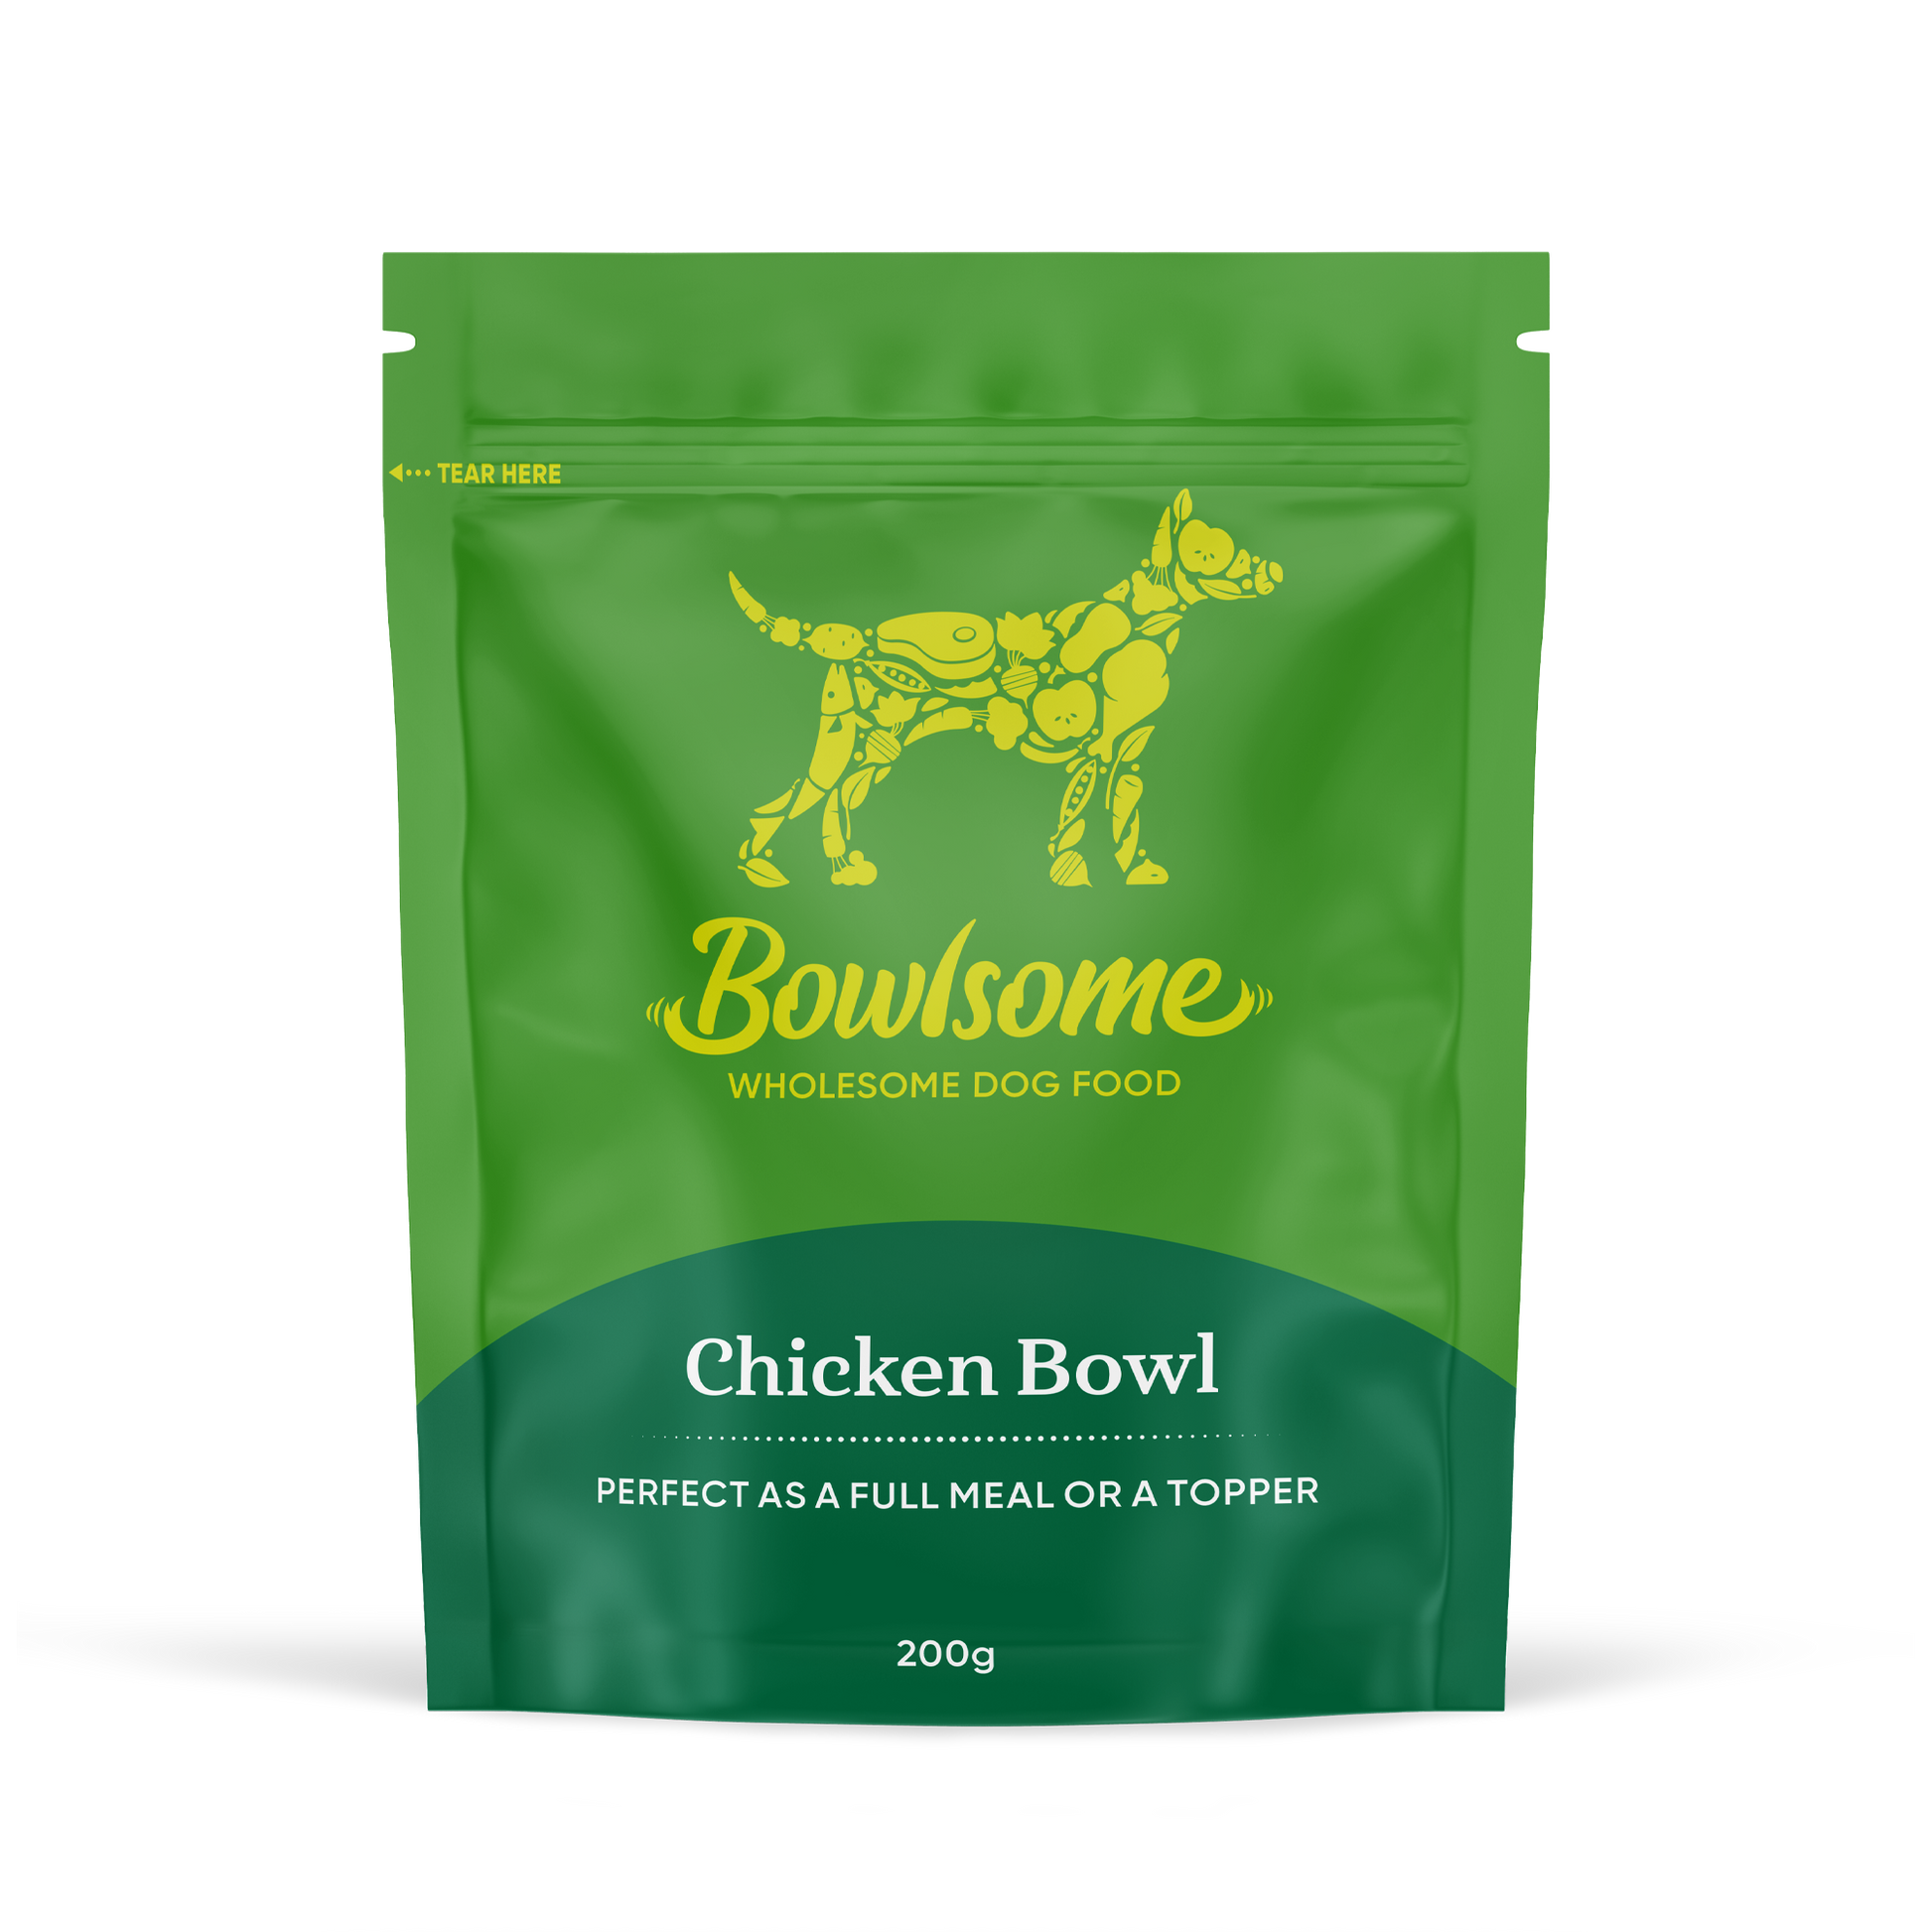 Pouch of dog food that reads "Bowlsome - Wholesome Dog Food, Chicken Bowl"